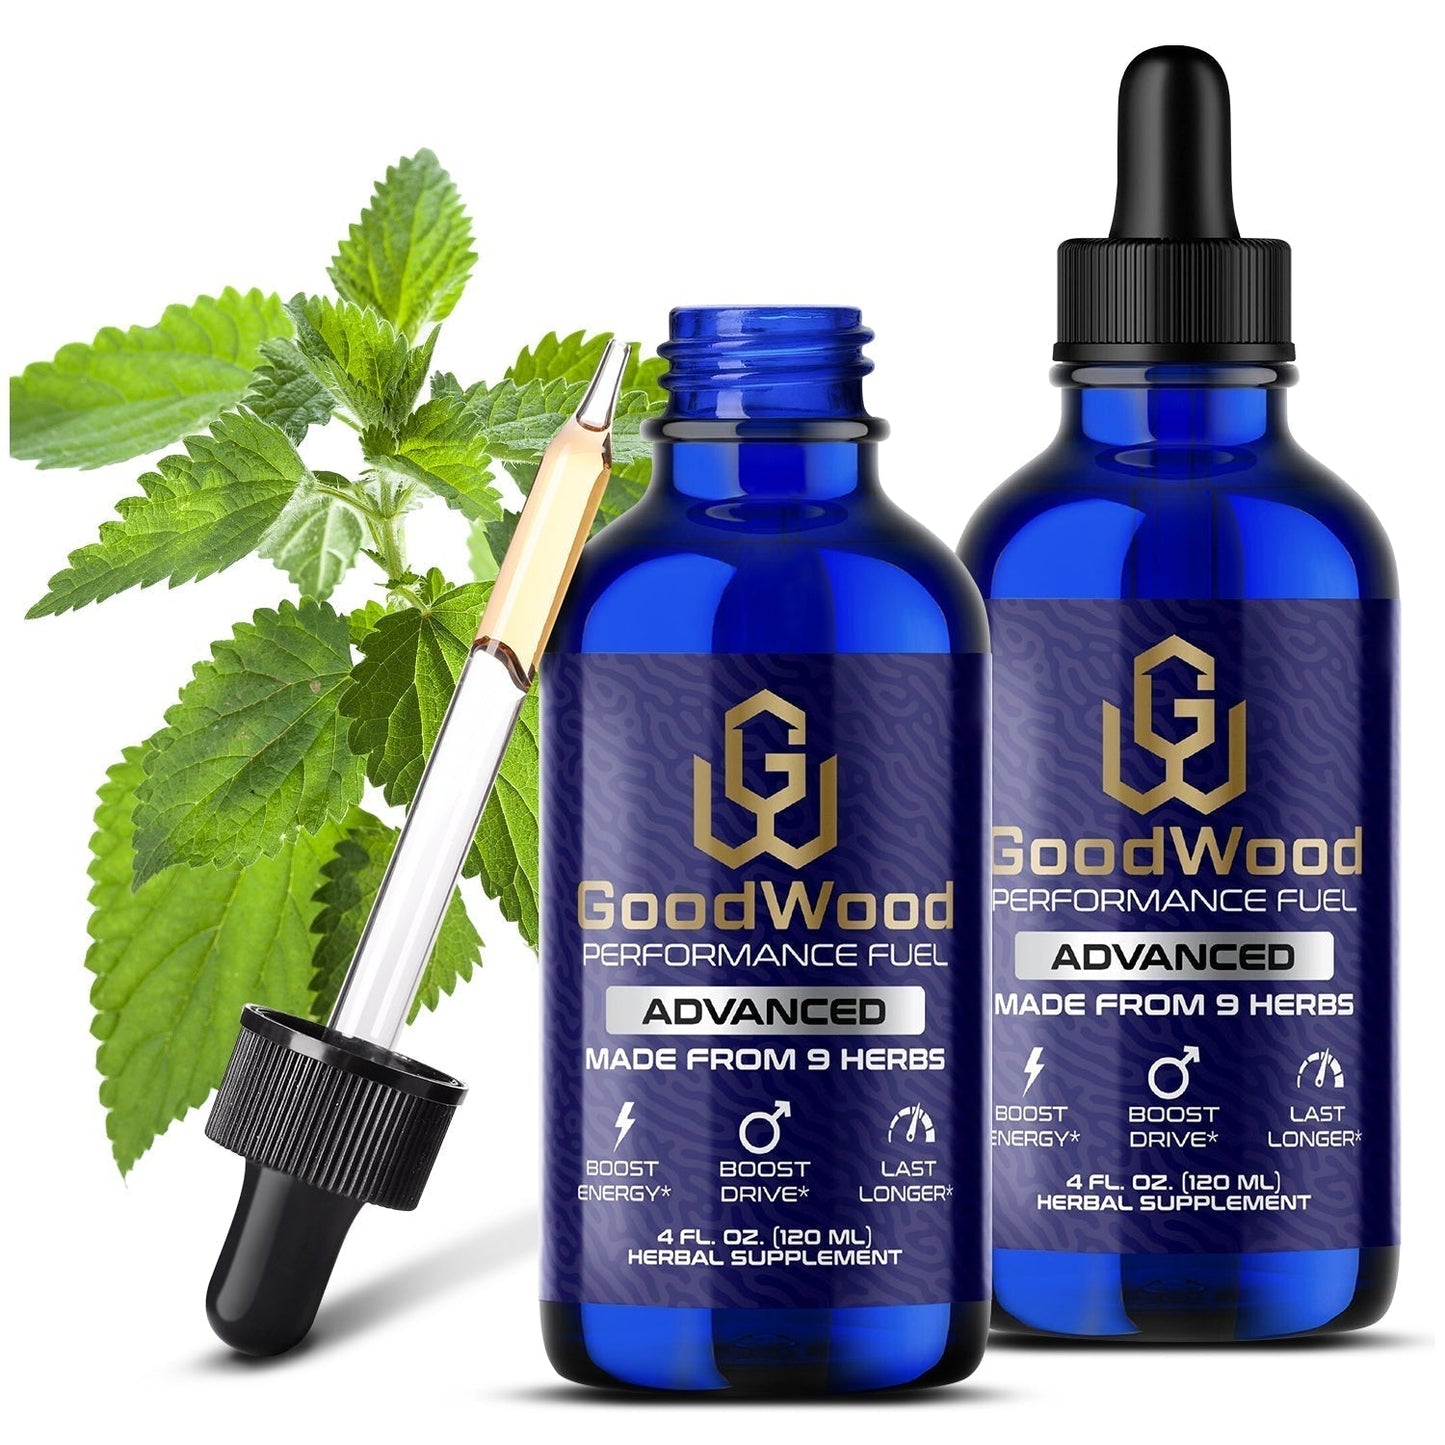 2 Bottles of GoodWood Advanced + One-On-One Coaching ($699/month value)